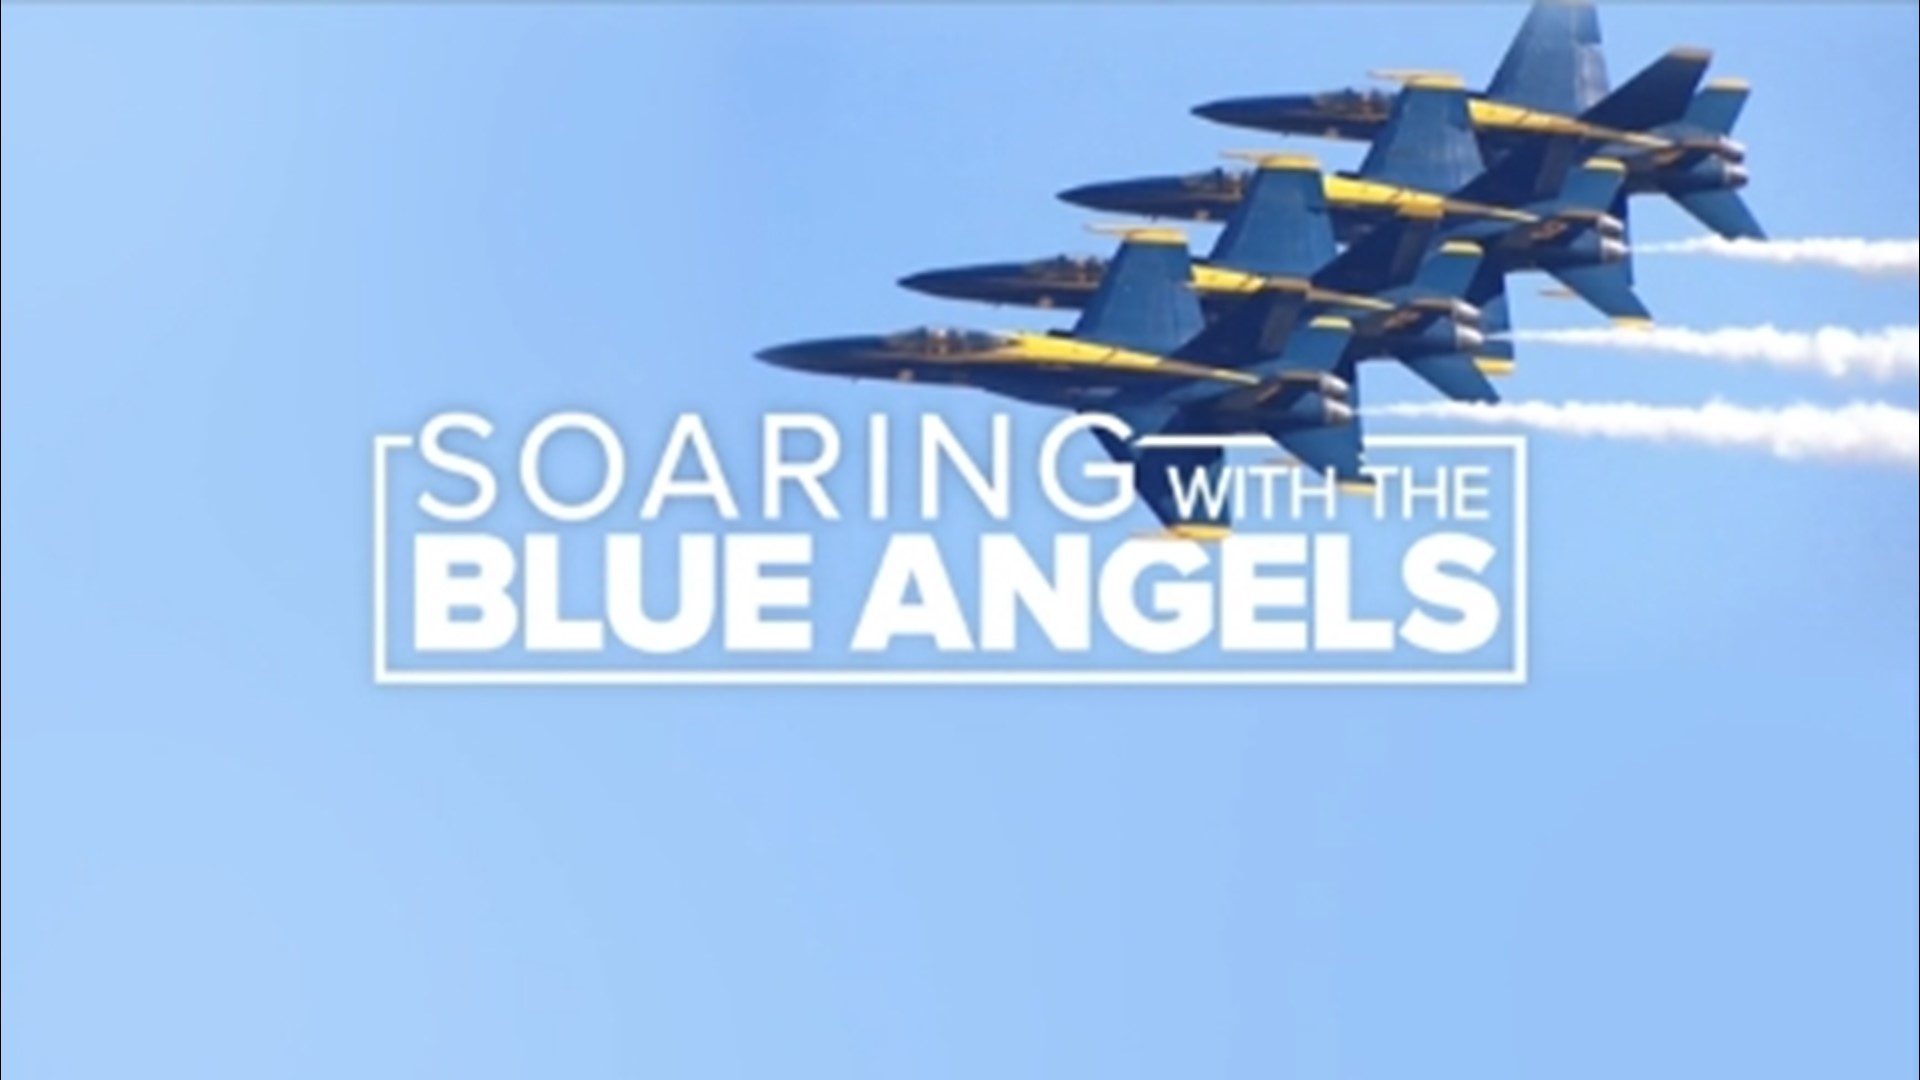 CBS 8’s Marcella Lee had the opportunity to preview one of the main attractions at the Miramar Air Show as she took to the skies on her flight with the Blue Angels!